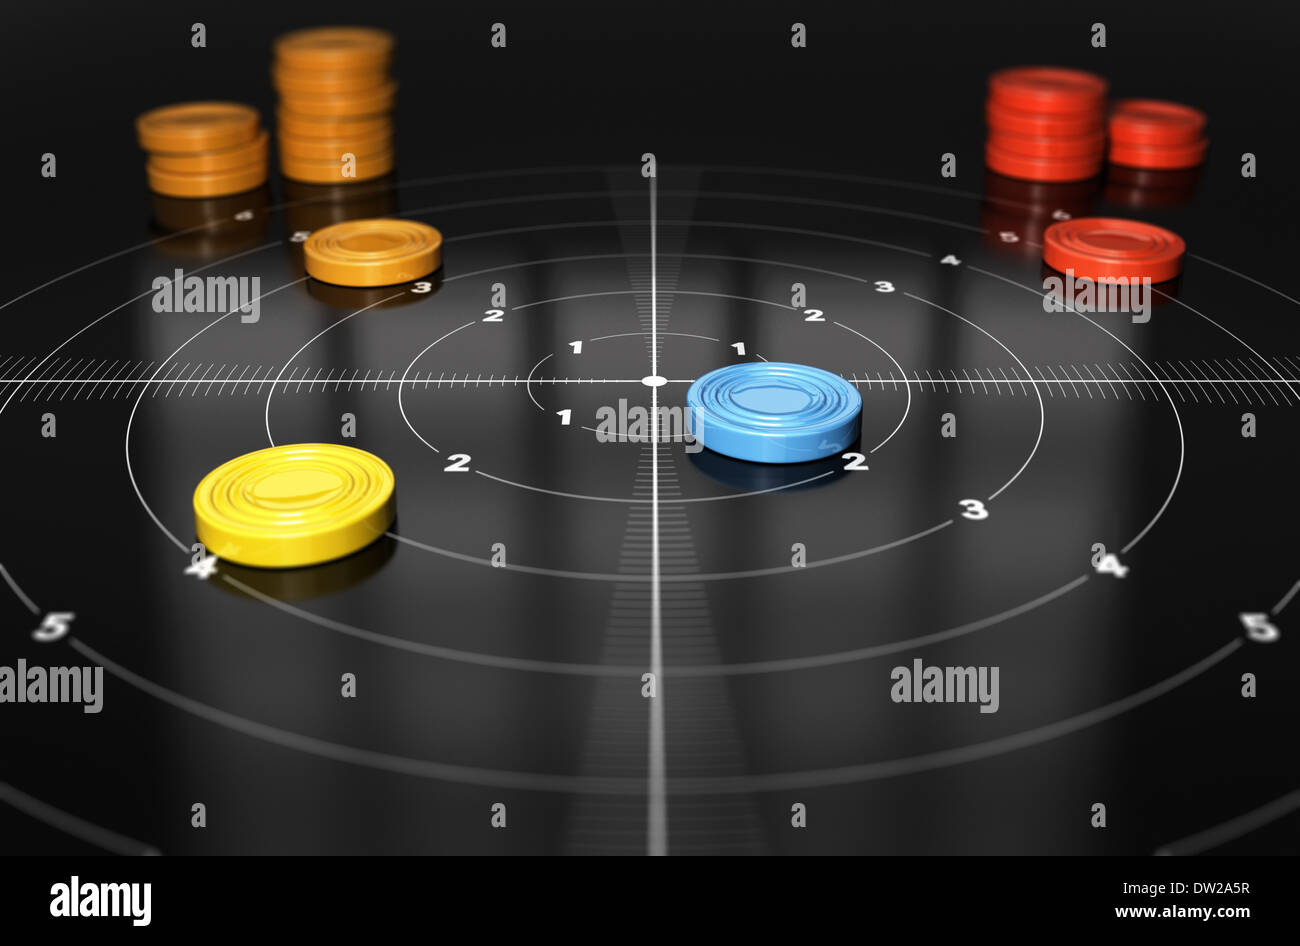 One target and many pawns with different colours, concept of smart objectives and performance measurement Stock Photo